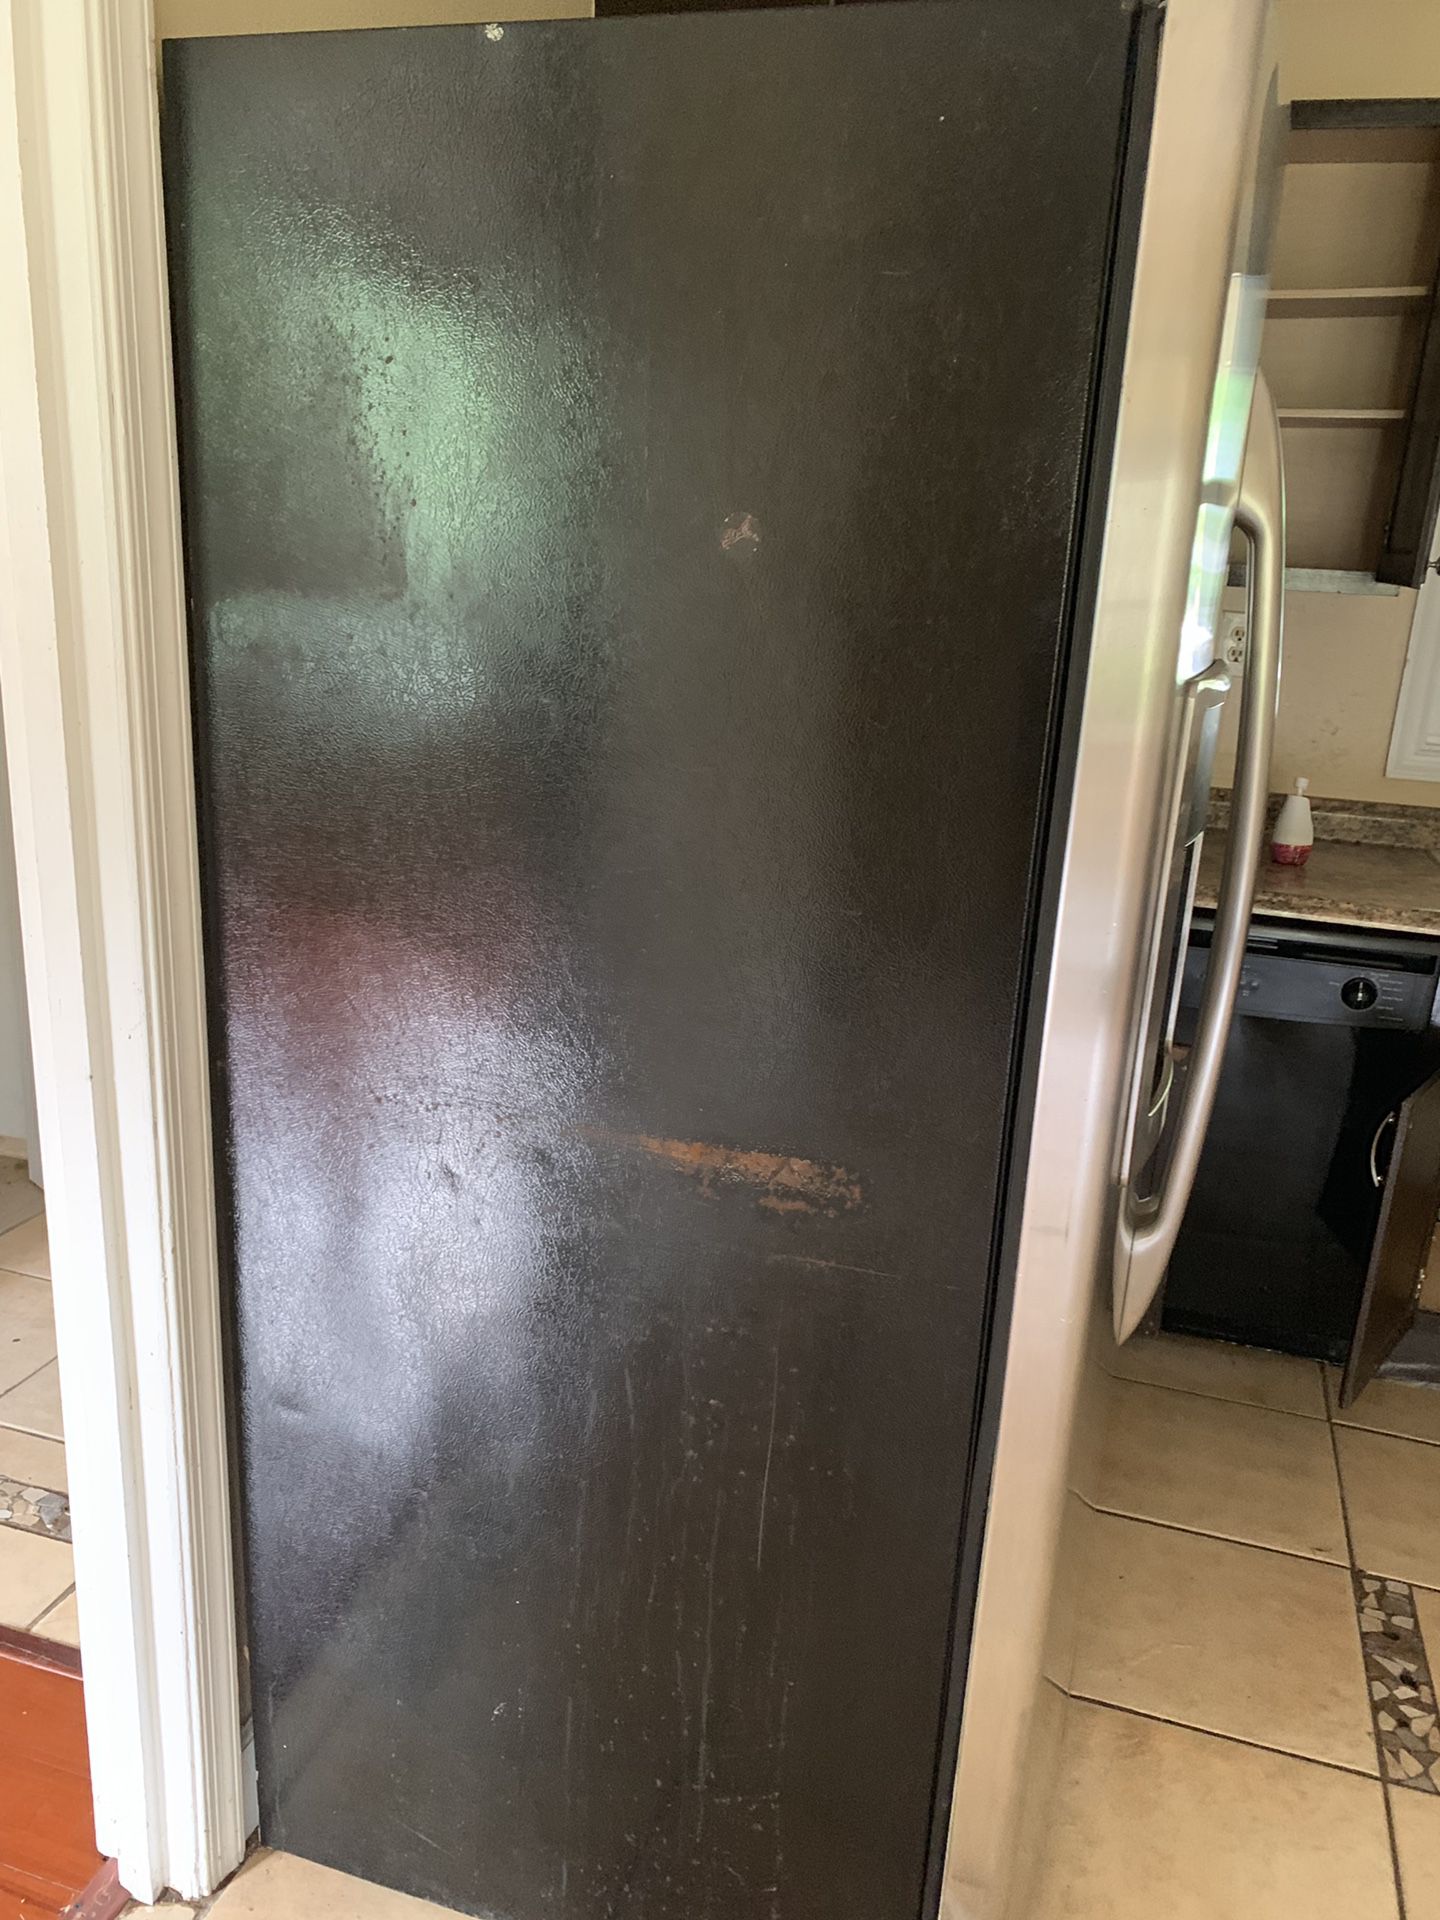 GE Refrigerator No water comes out of the device. If it makes ice. Maybe it's offline. but the fridge works very well. currently in use. As is